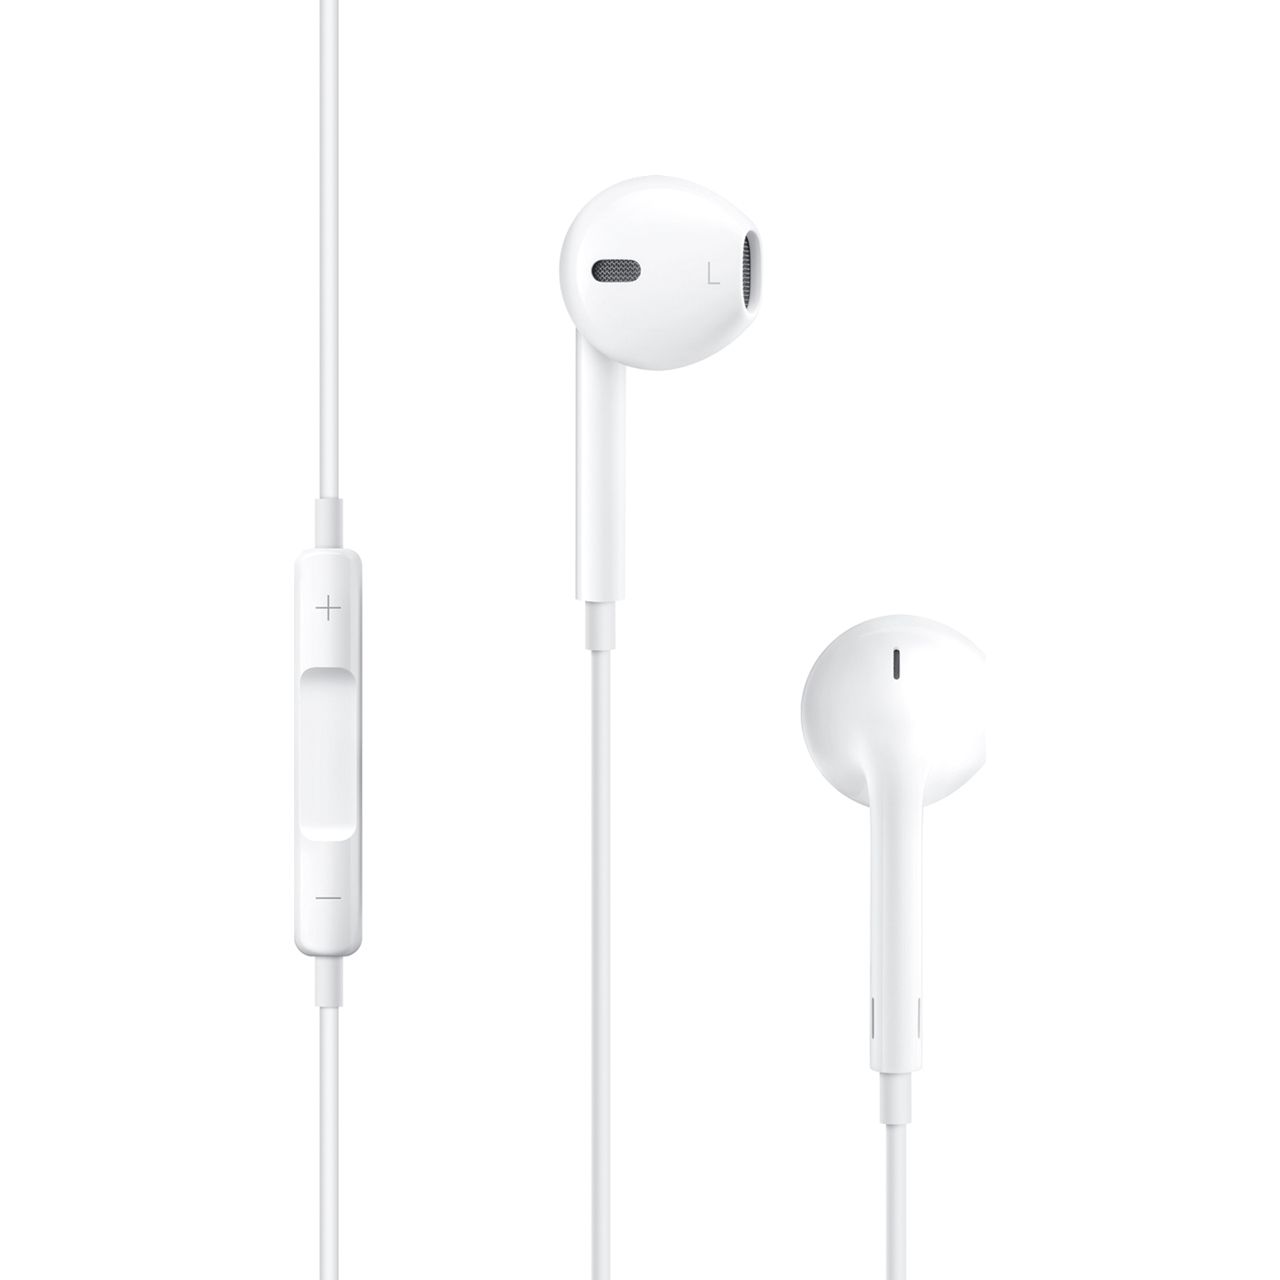 Apple EarPods with Lightning Connector Review